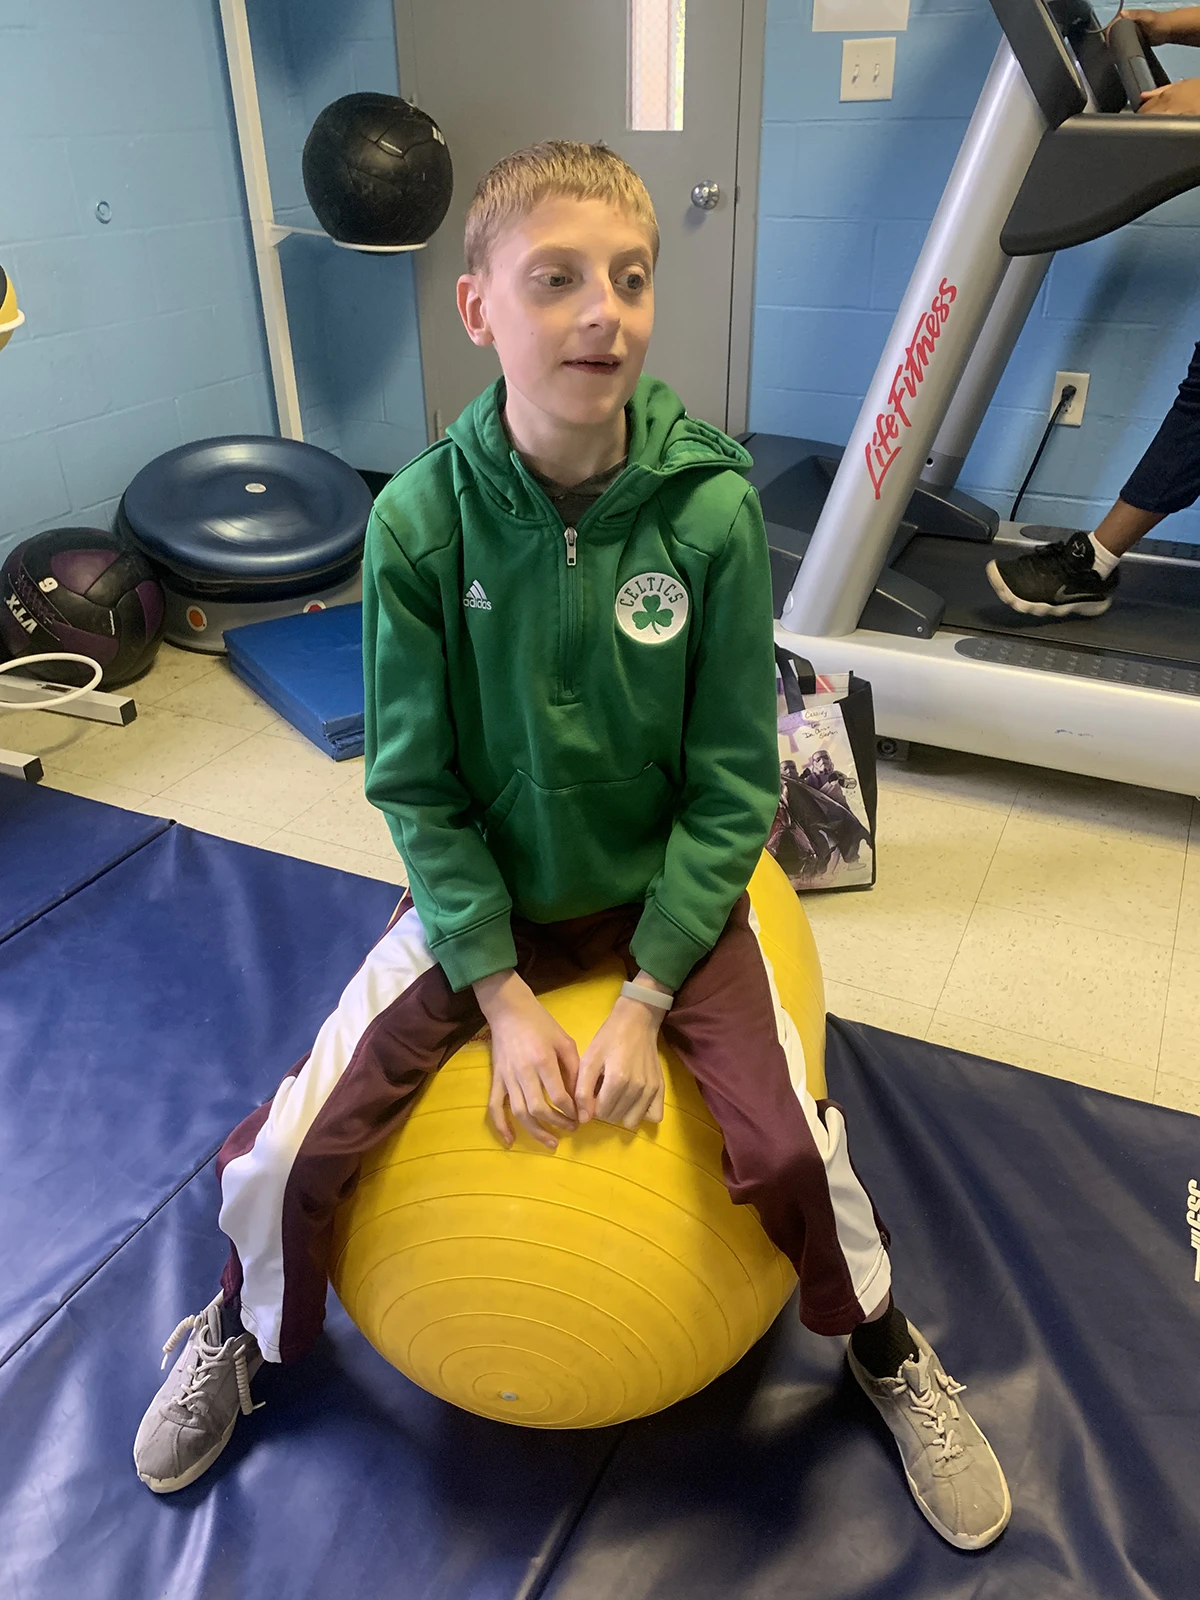 Cushing student doing physical therapy on an exercise ball.